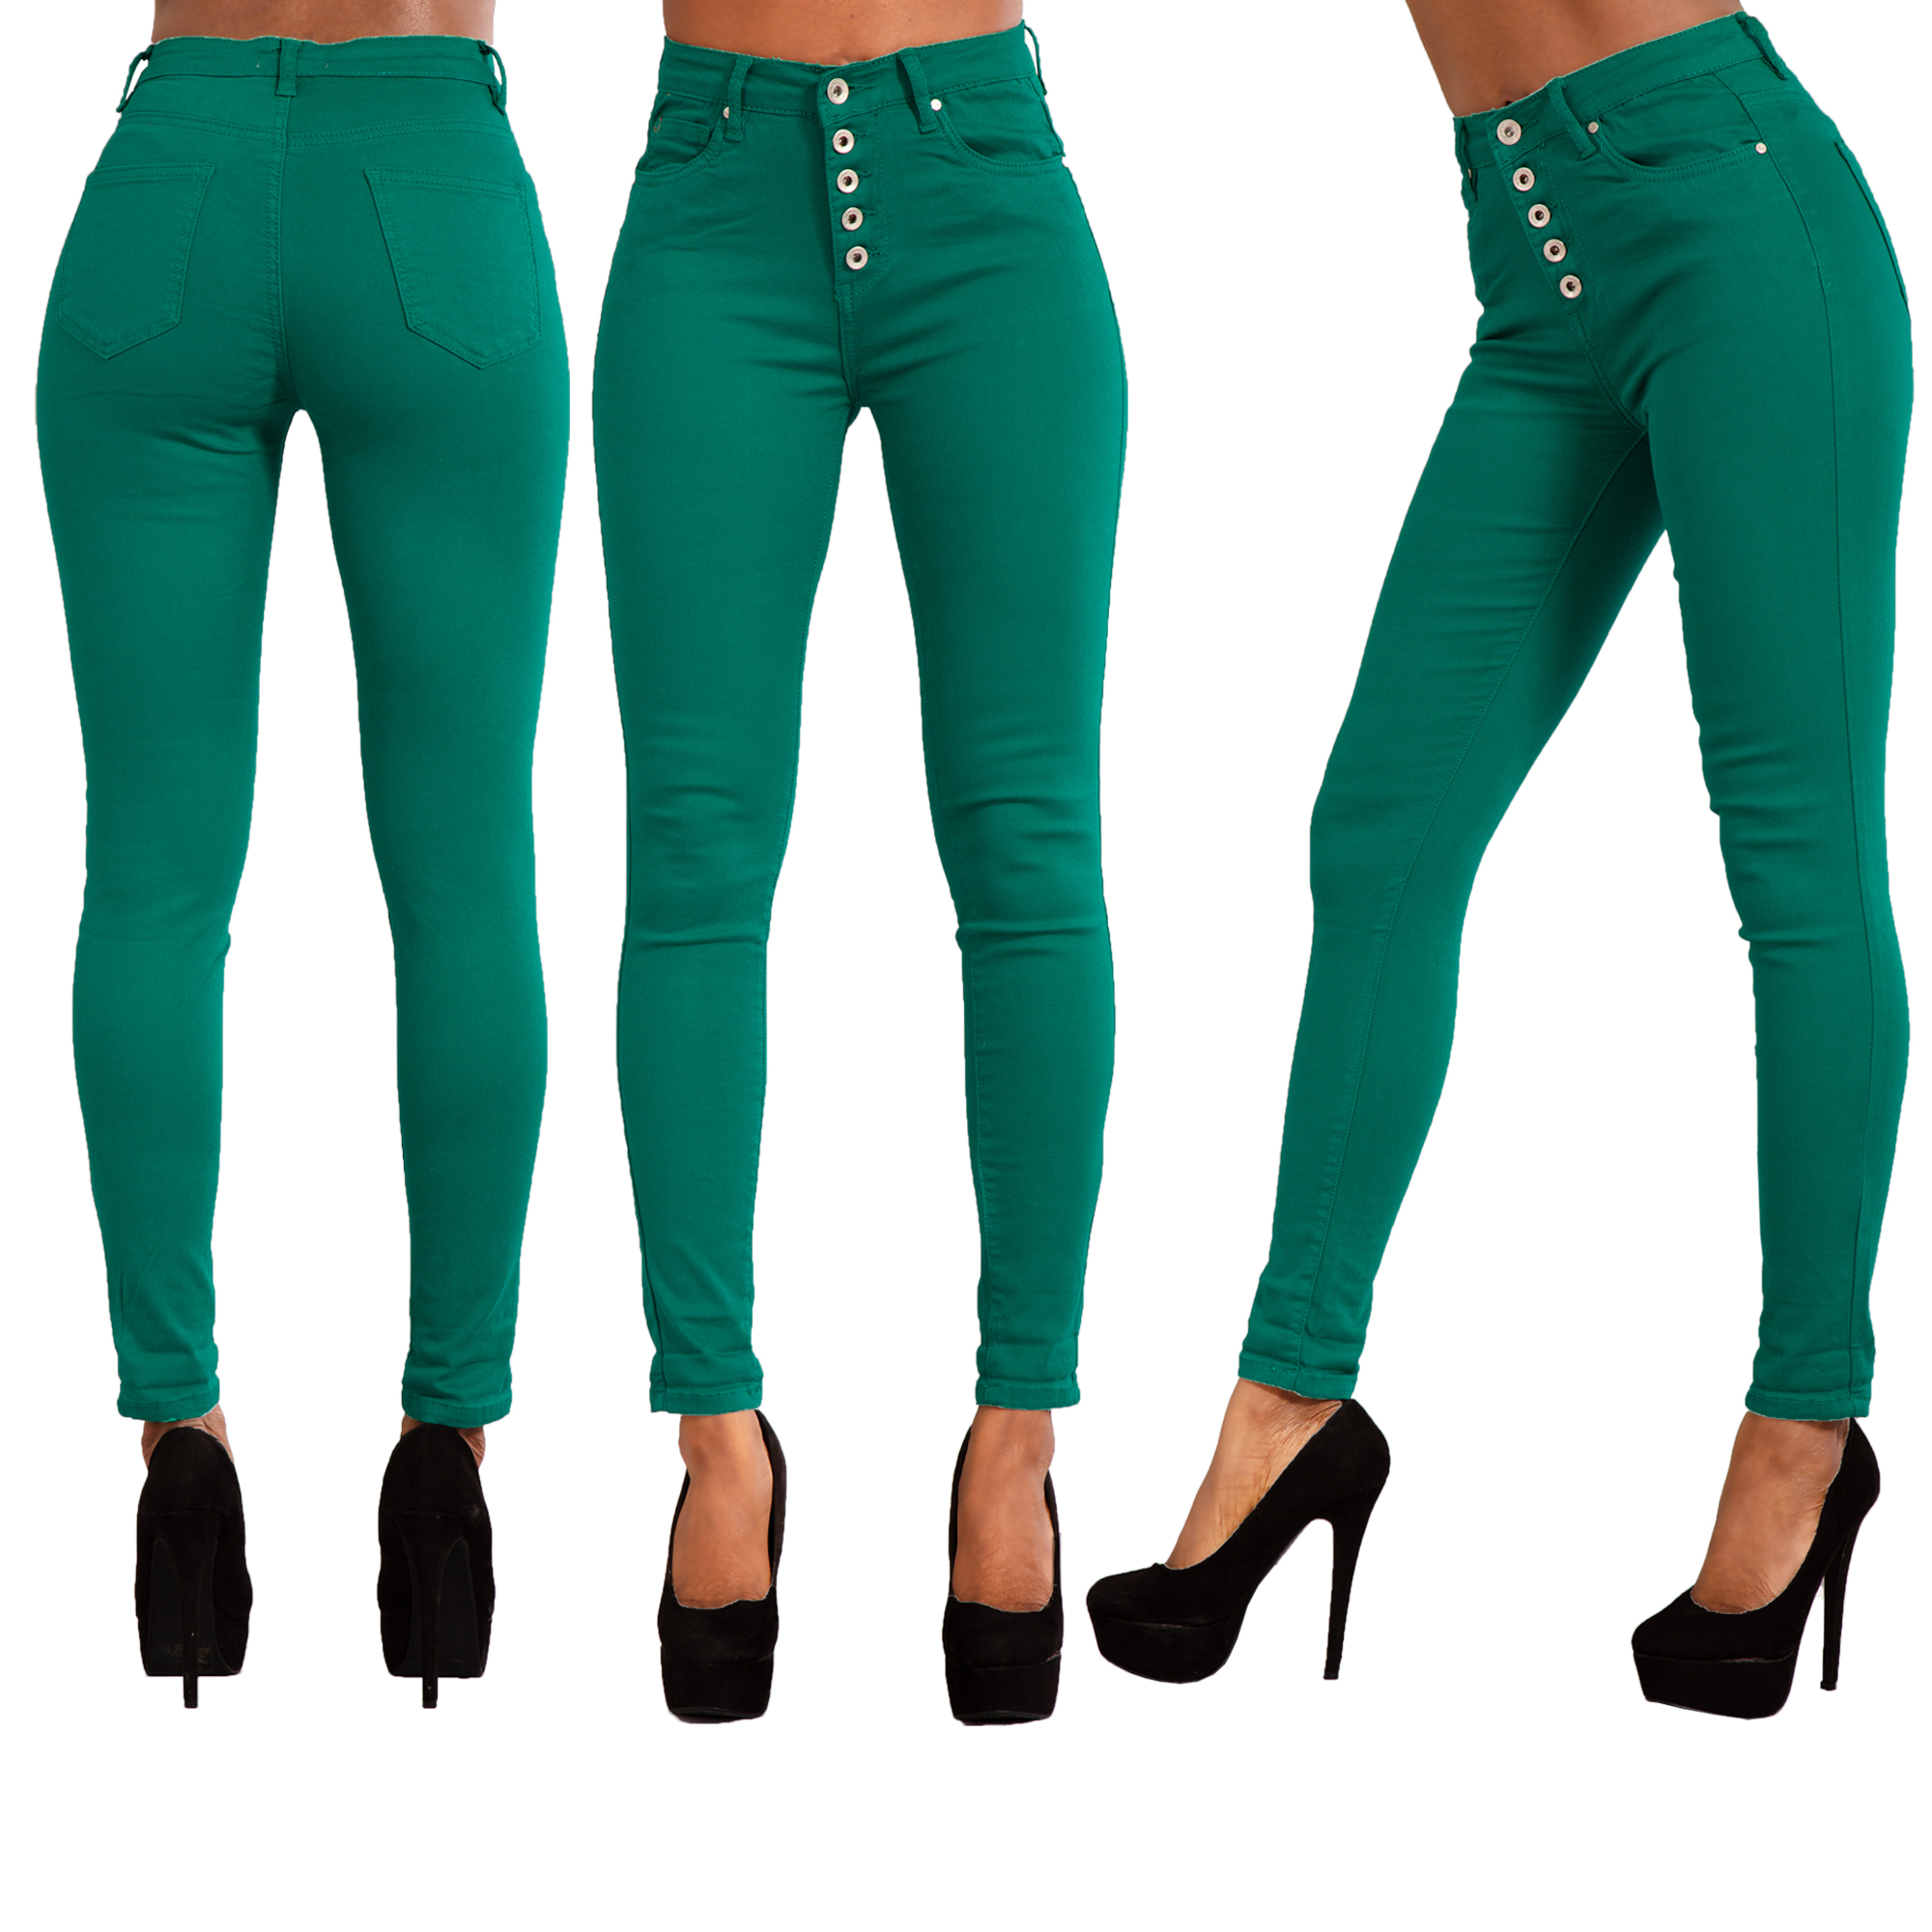 green high waisted jeans